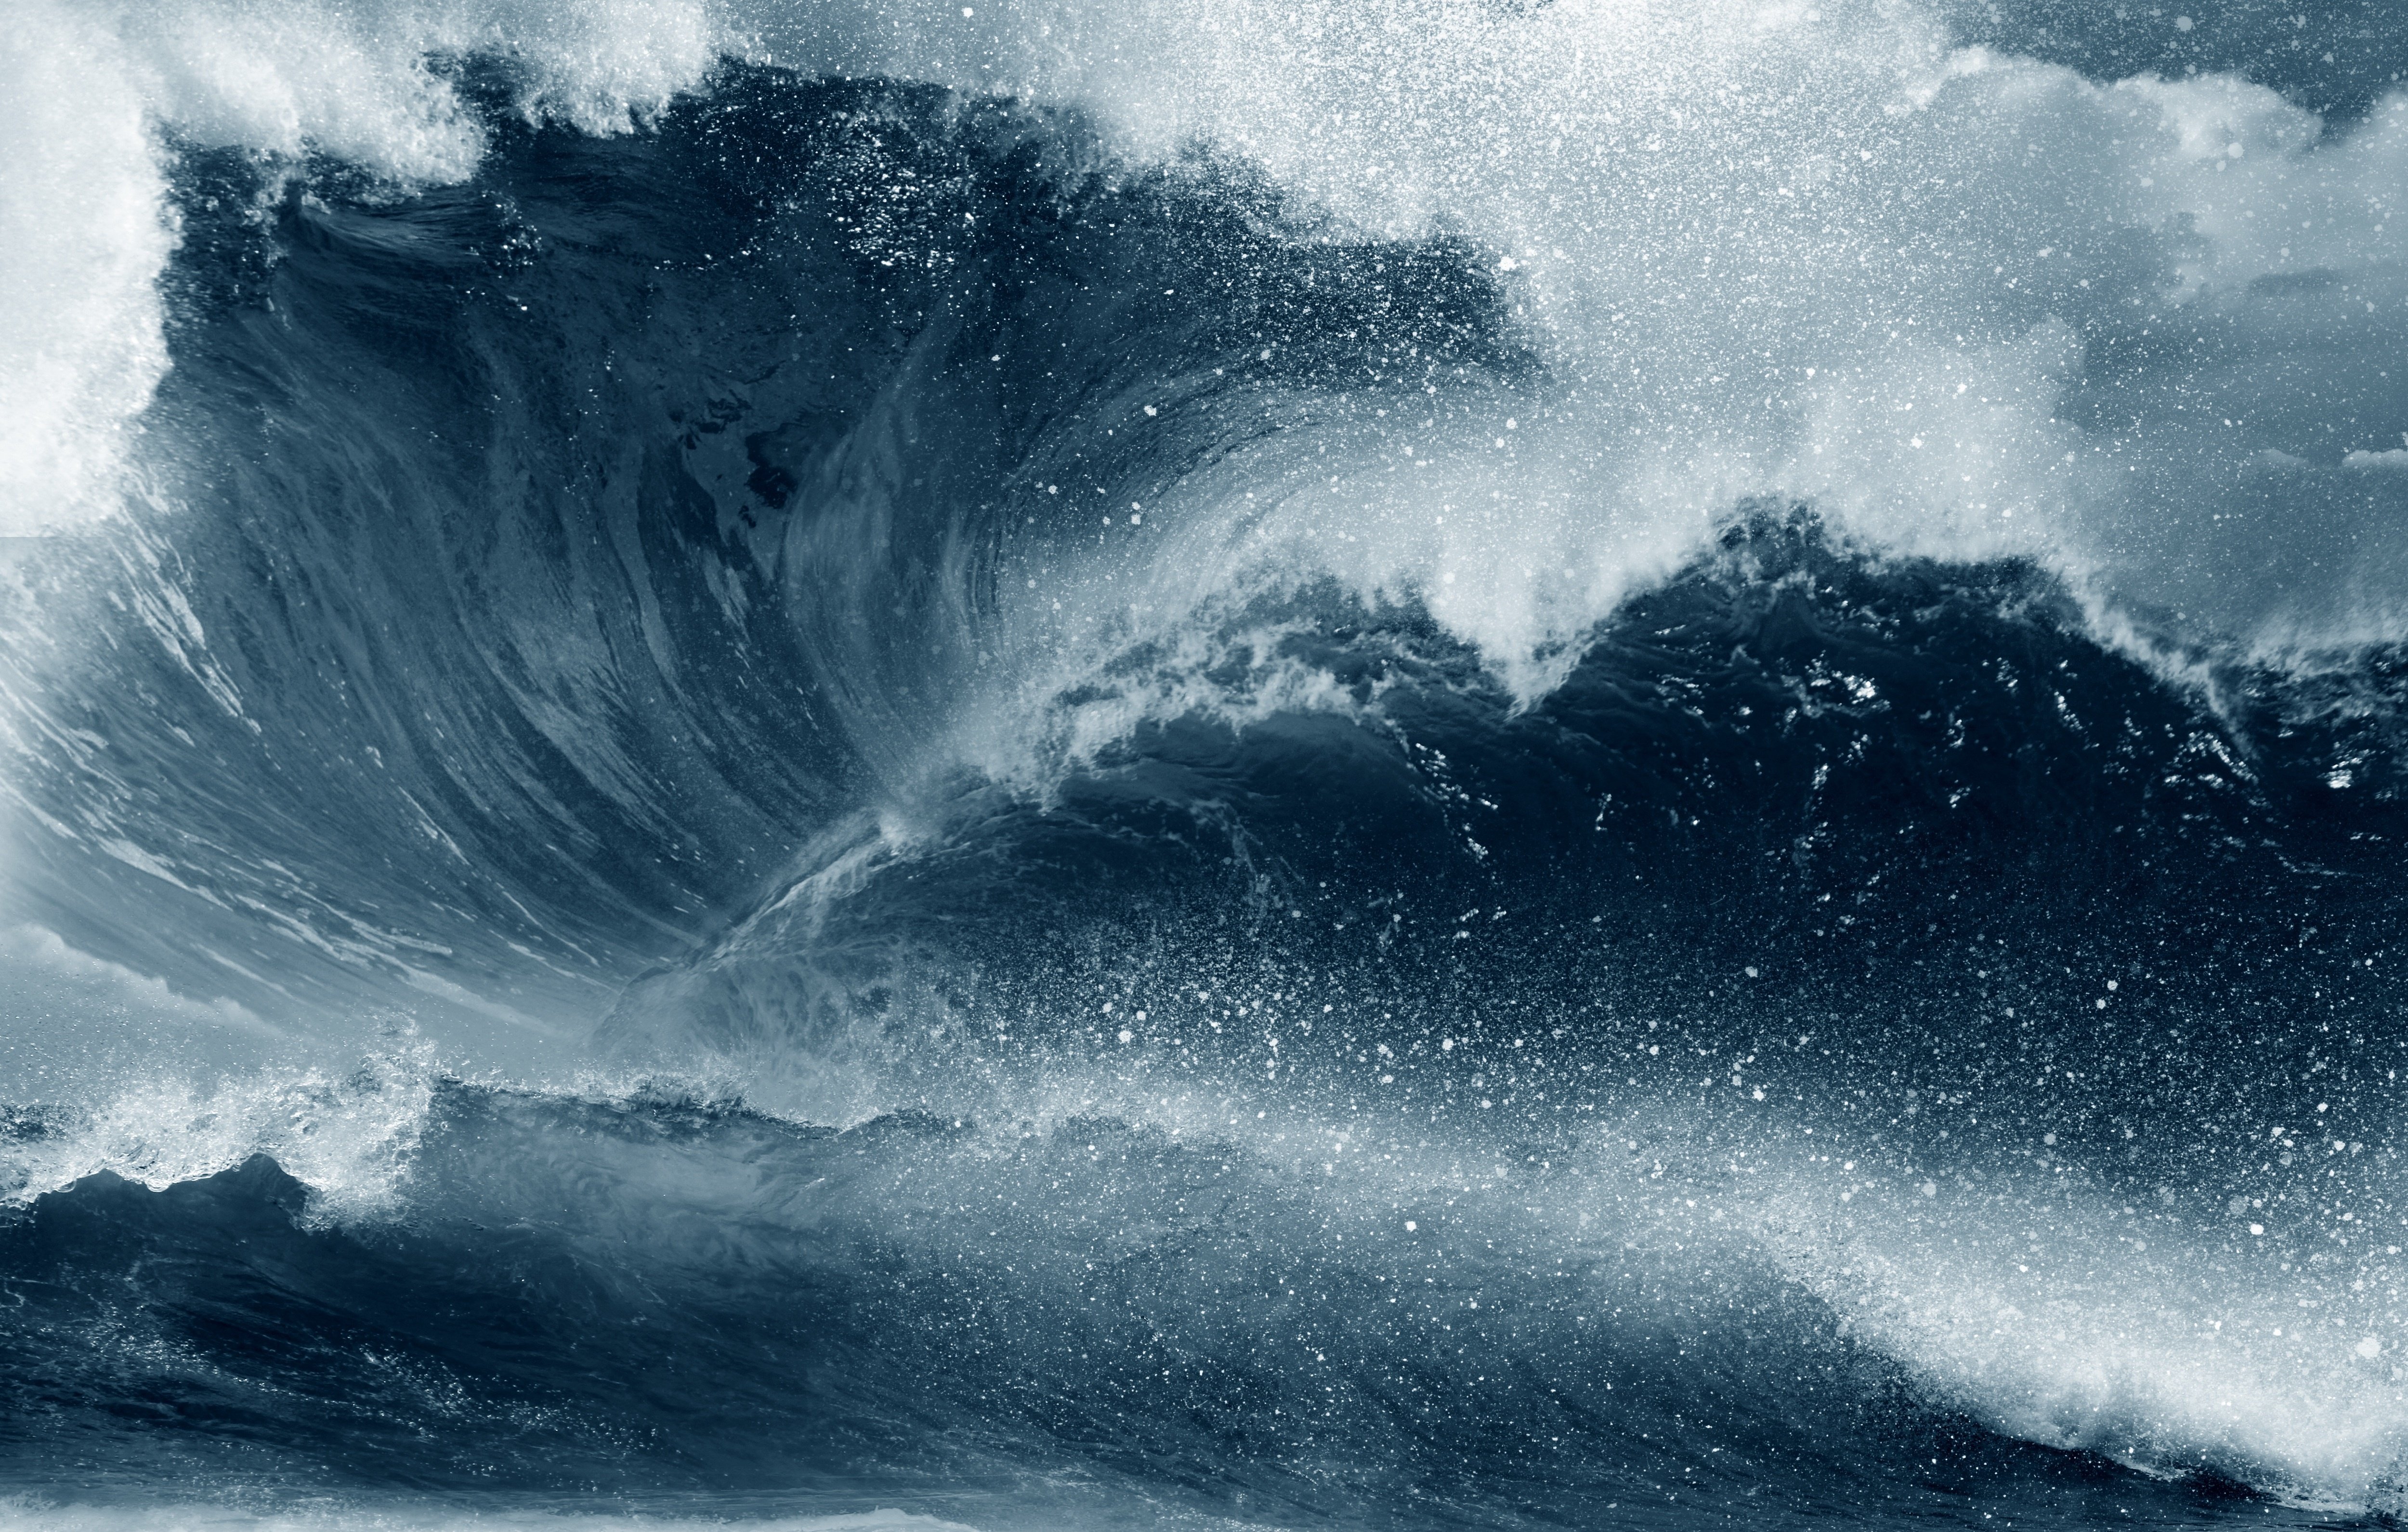 Ocean Storm Waves Pictures > Minionswallpaper